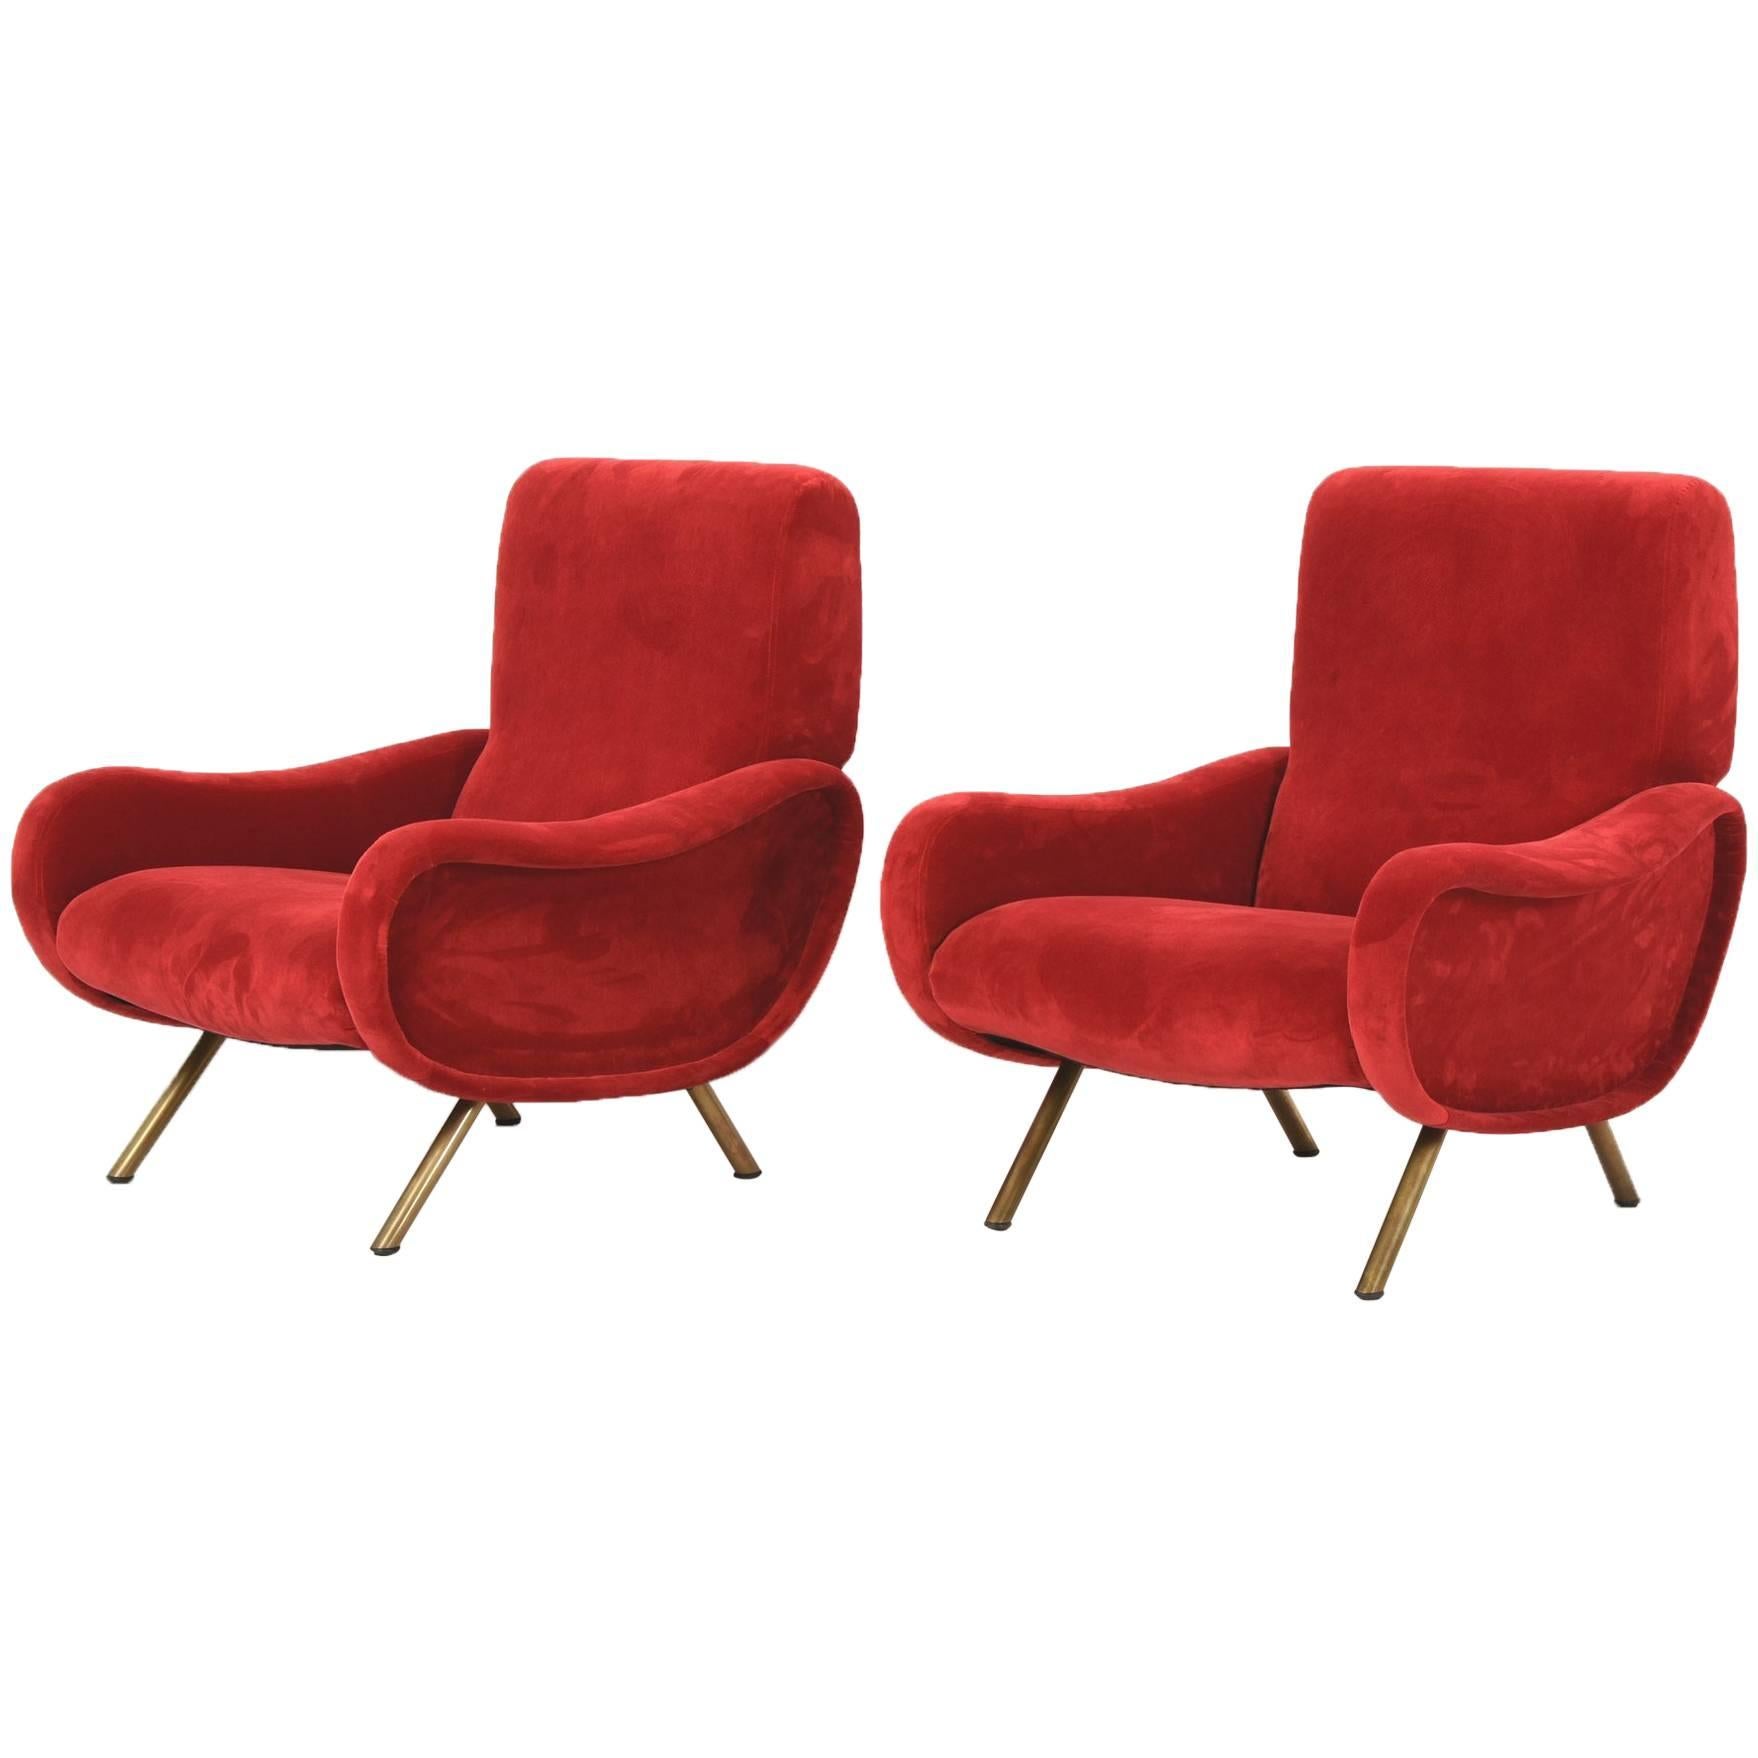 Pair of Easy Chairs Marco Zanuso 1951 for Arflex Model Lady For Sale